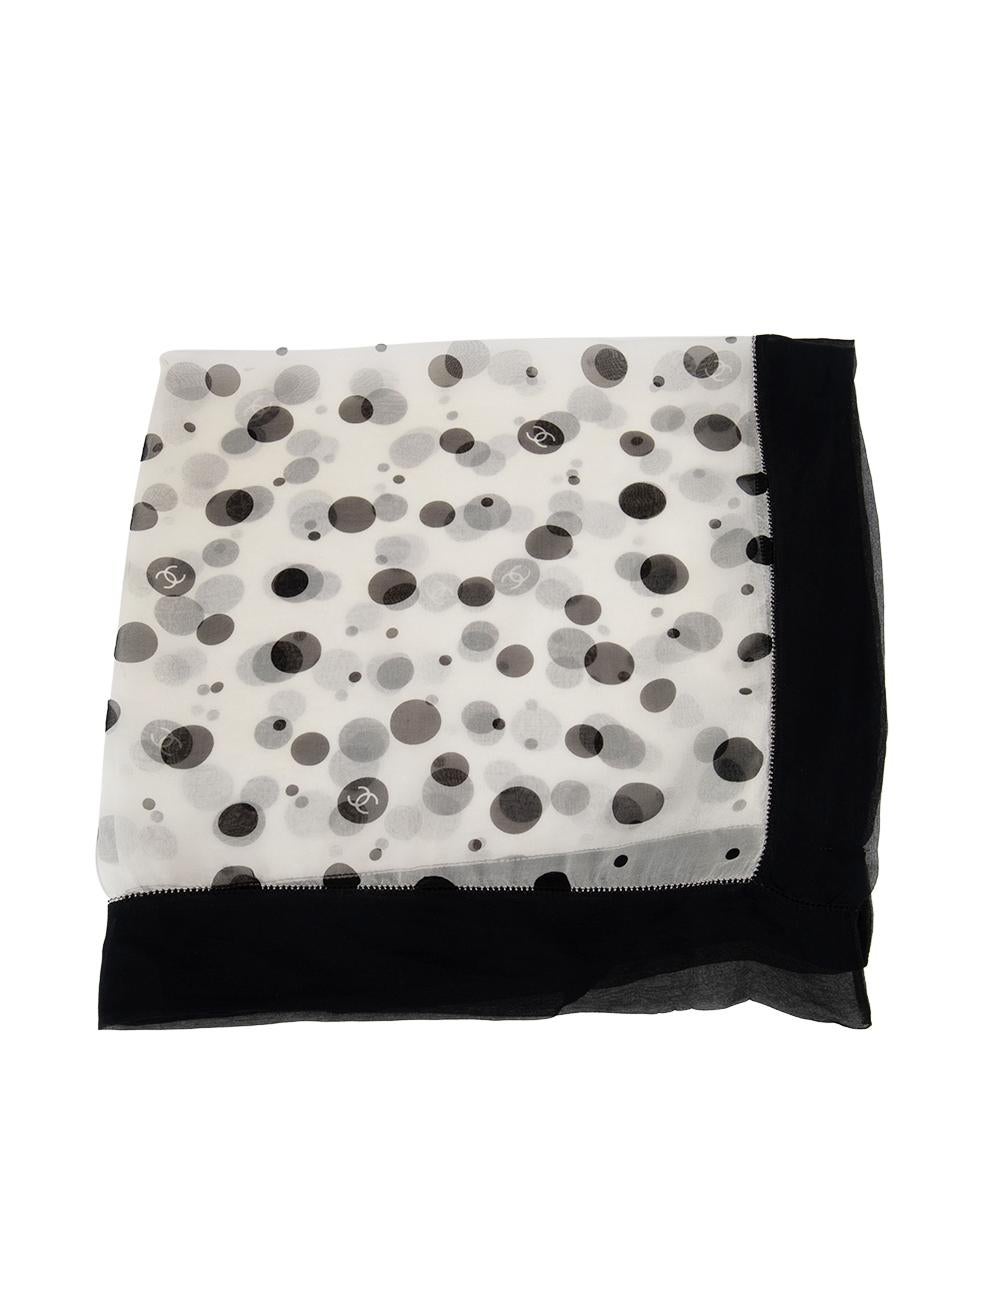 CONDITION is Very good. Minimal wear of the scarf is evident. Small hole in the corner on this used Chanel designer resale item.
 
 
 
 Details
 
 
 Black and white
 
 Silk
 
 Square scarf
 
 Polkadot pattern
 
 Interlocking CC logo detail
 
 
 

 
